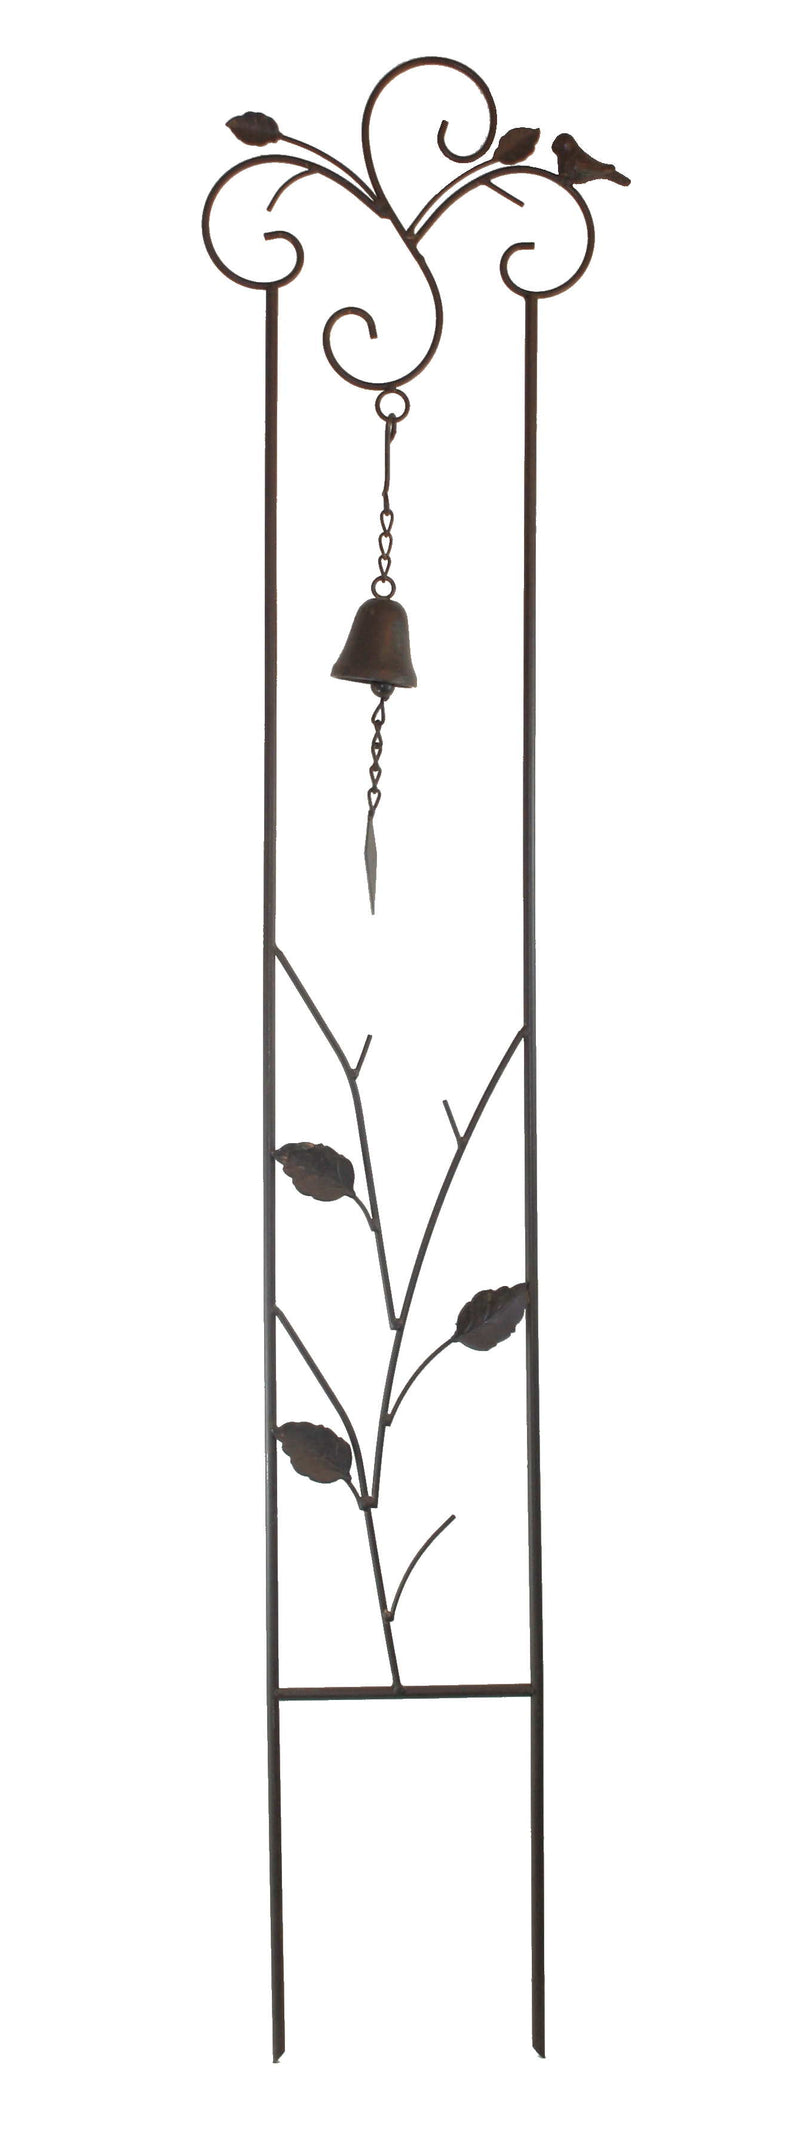 52.25-Inch High Rustic Metal Garden Trellis with Bell - Style